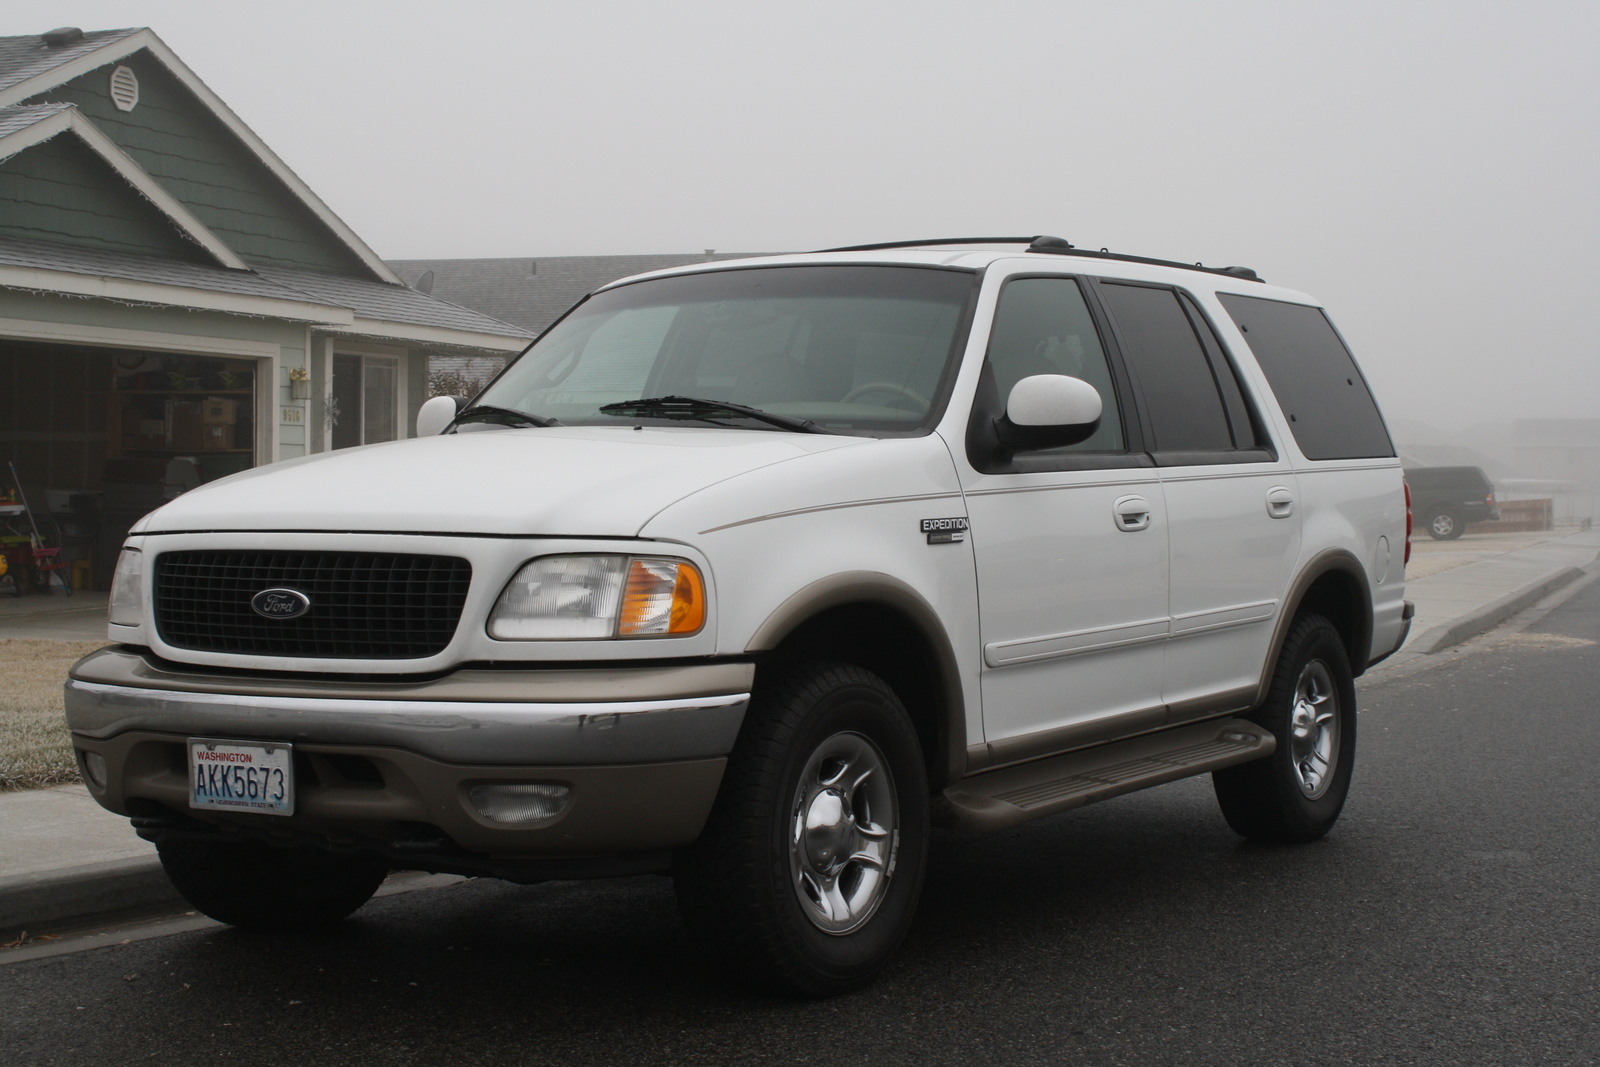 2000 Ford Expedition - Pictures - CarGurus